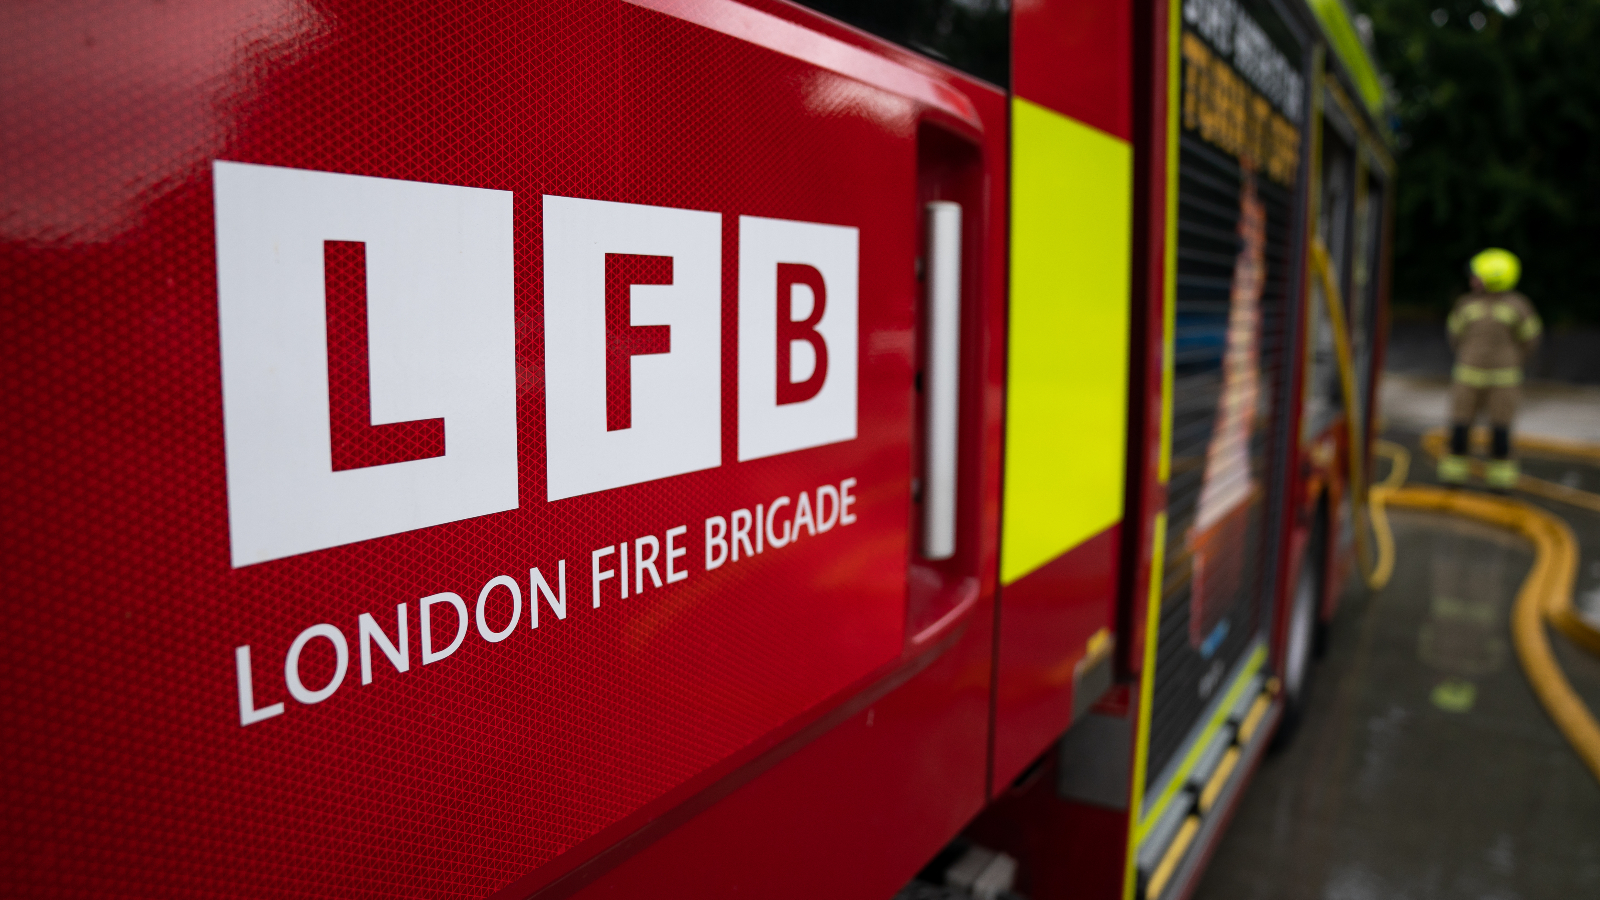 London Fire Brigade on X: E-bikes and e-scooters are London's